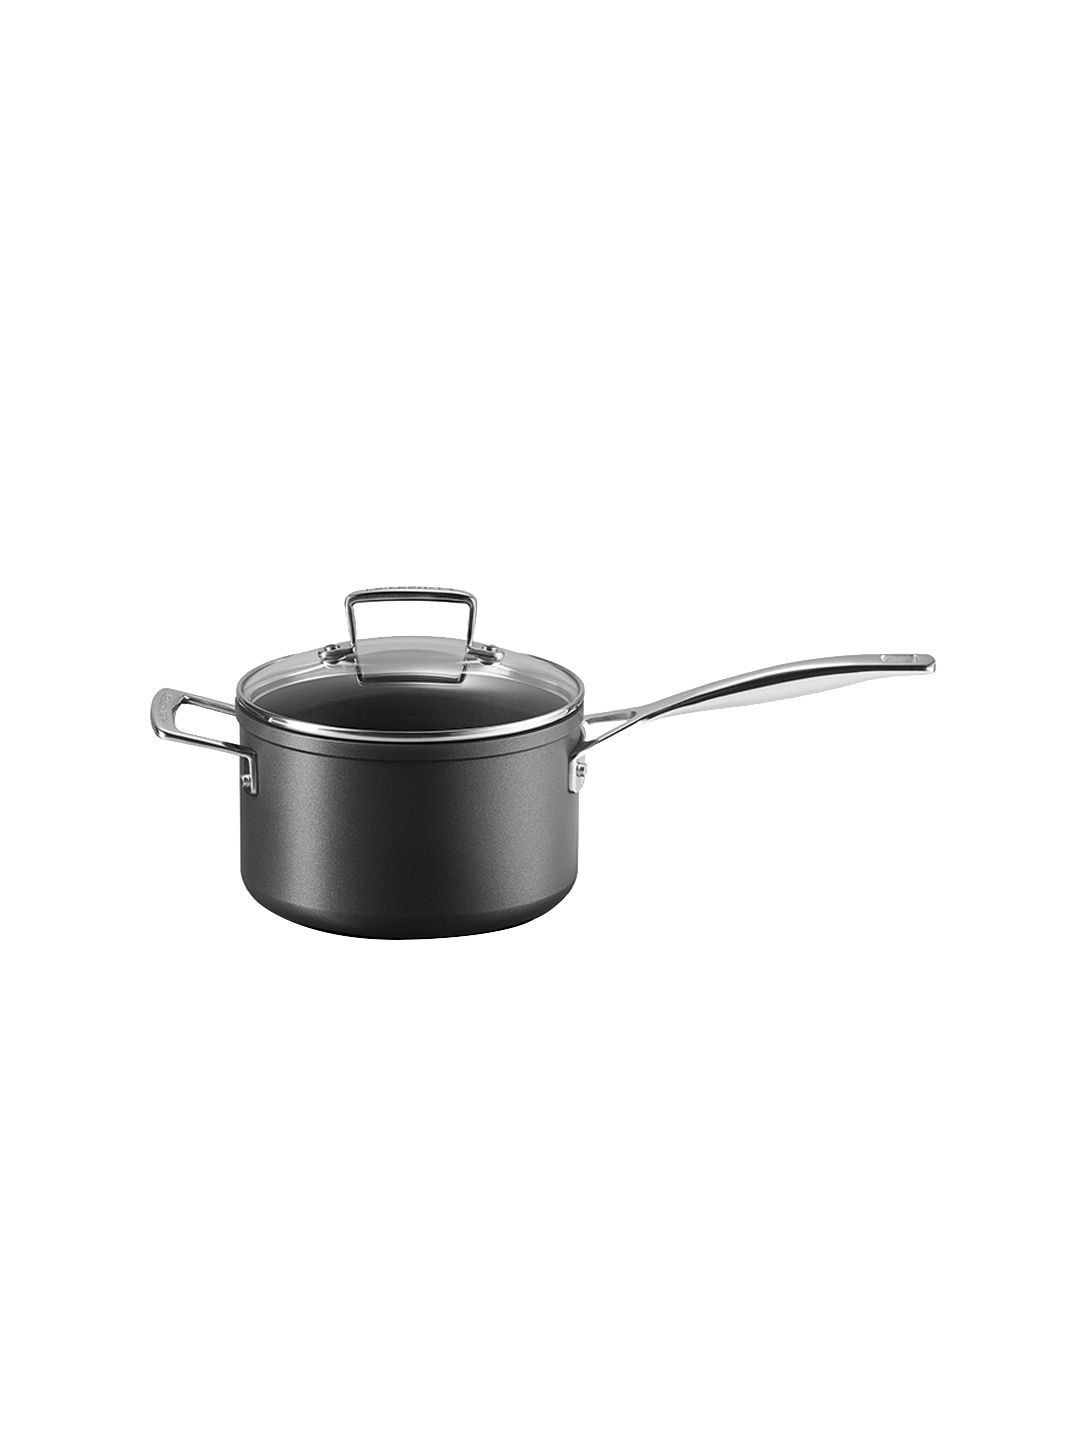 LE CREUSET Black Solid Stainless Steel Saucepan Price in India